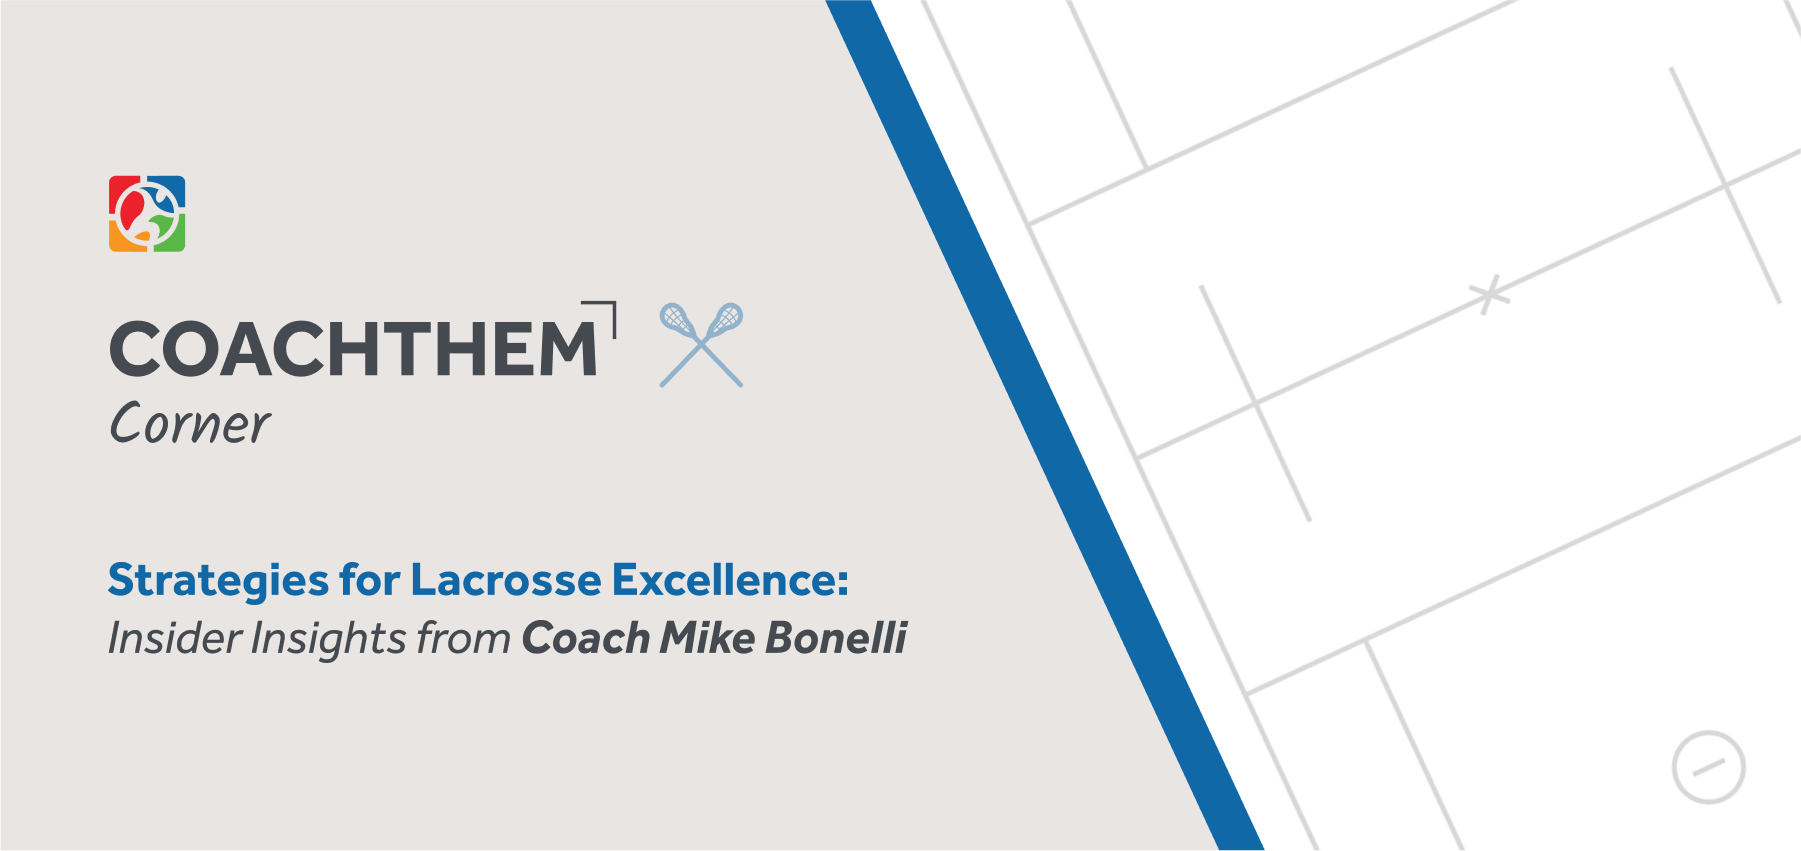 Strategies for Lacrosse Excellence: Insider Insights from Coach Mike Bonelli